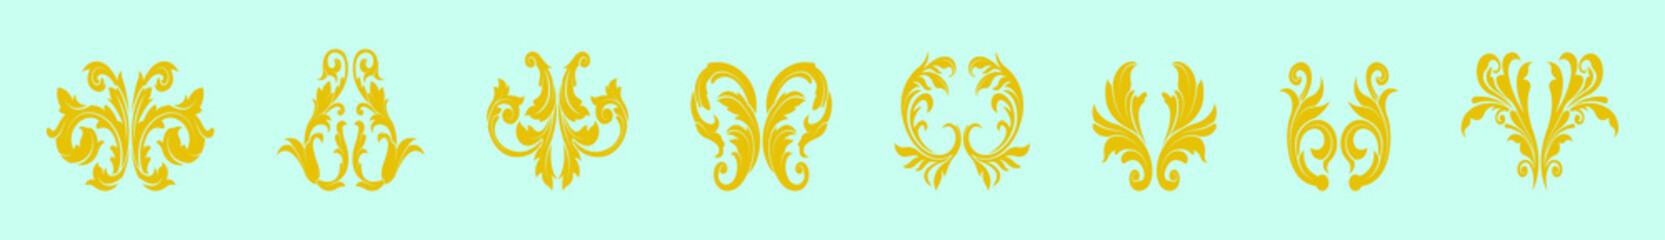 Set of golden vintage baroque ornament cartoon icon design template with various models. isolated on blue background